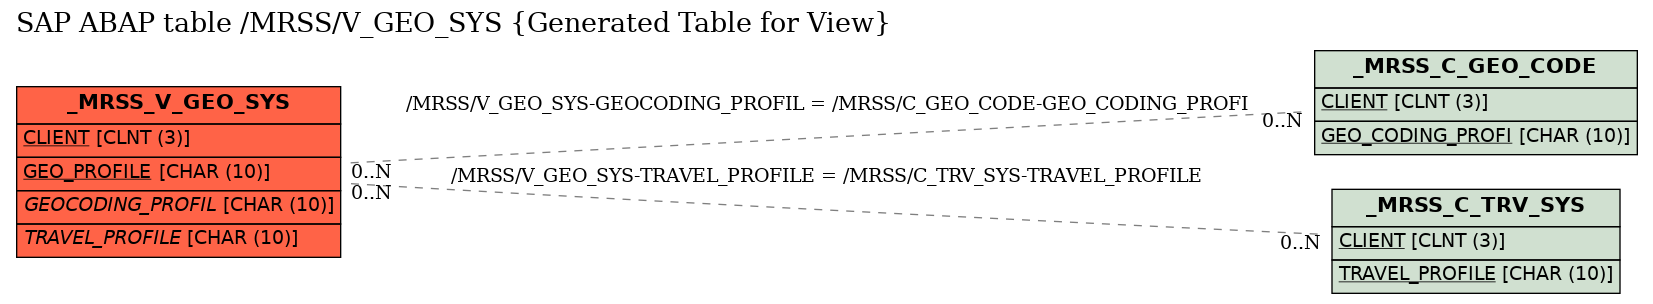 E-R Diagram for table /MRSS/V_GEO_SYS (Generated Table for View)